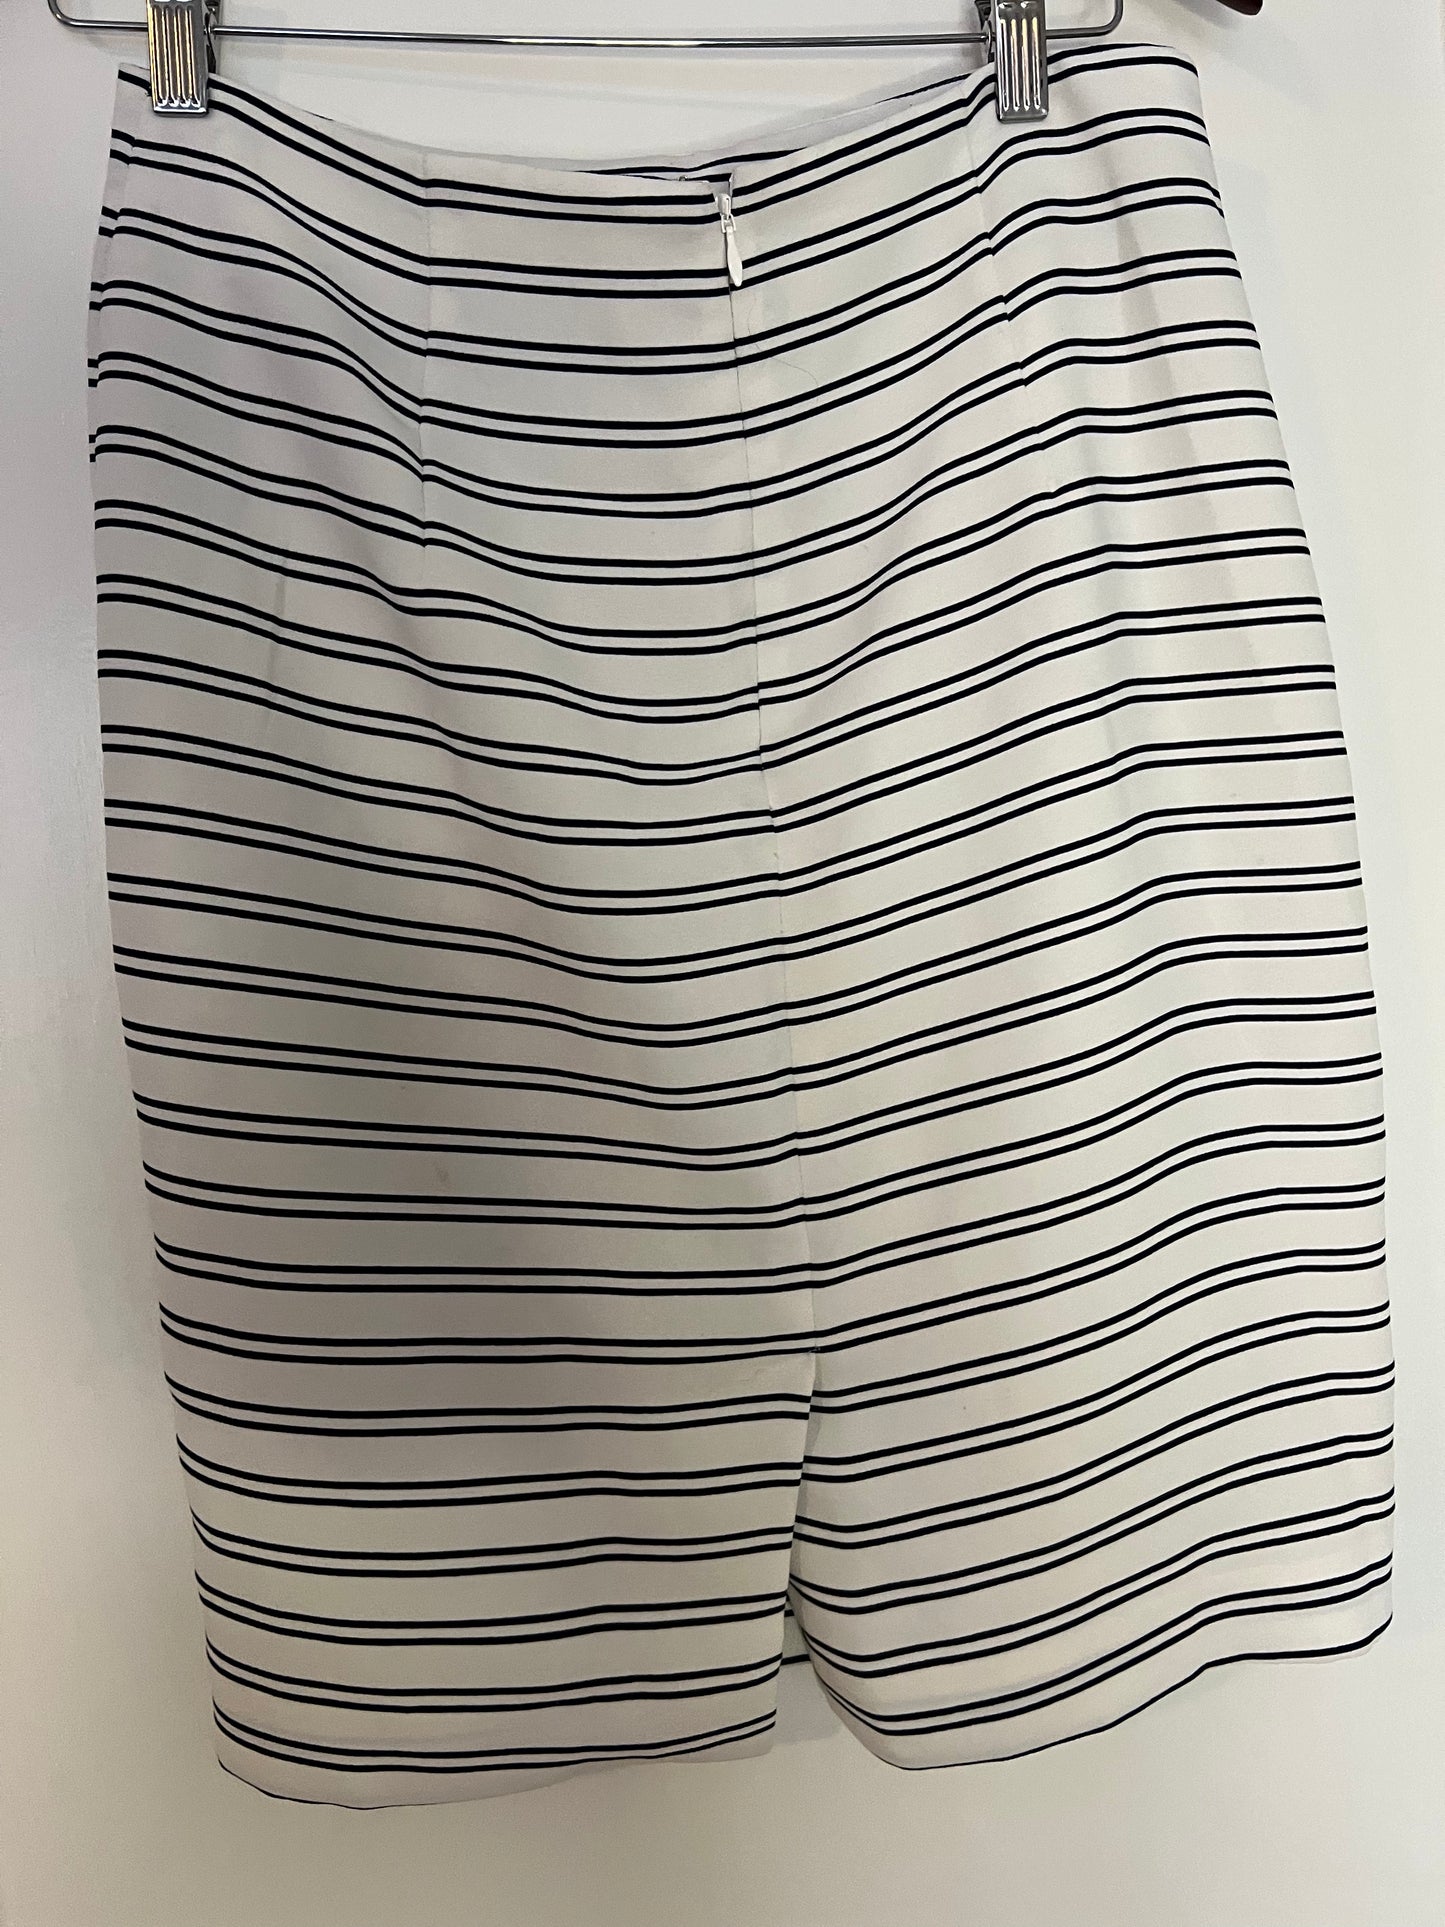 Banana Republic Blue and White Striped Pencil Skirt Size 4P EUC PPU 45208 or Spring Sale